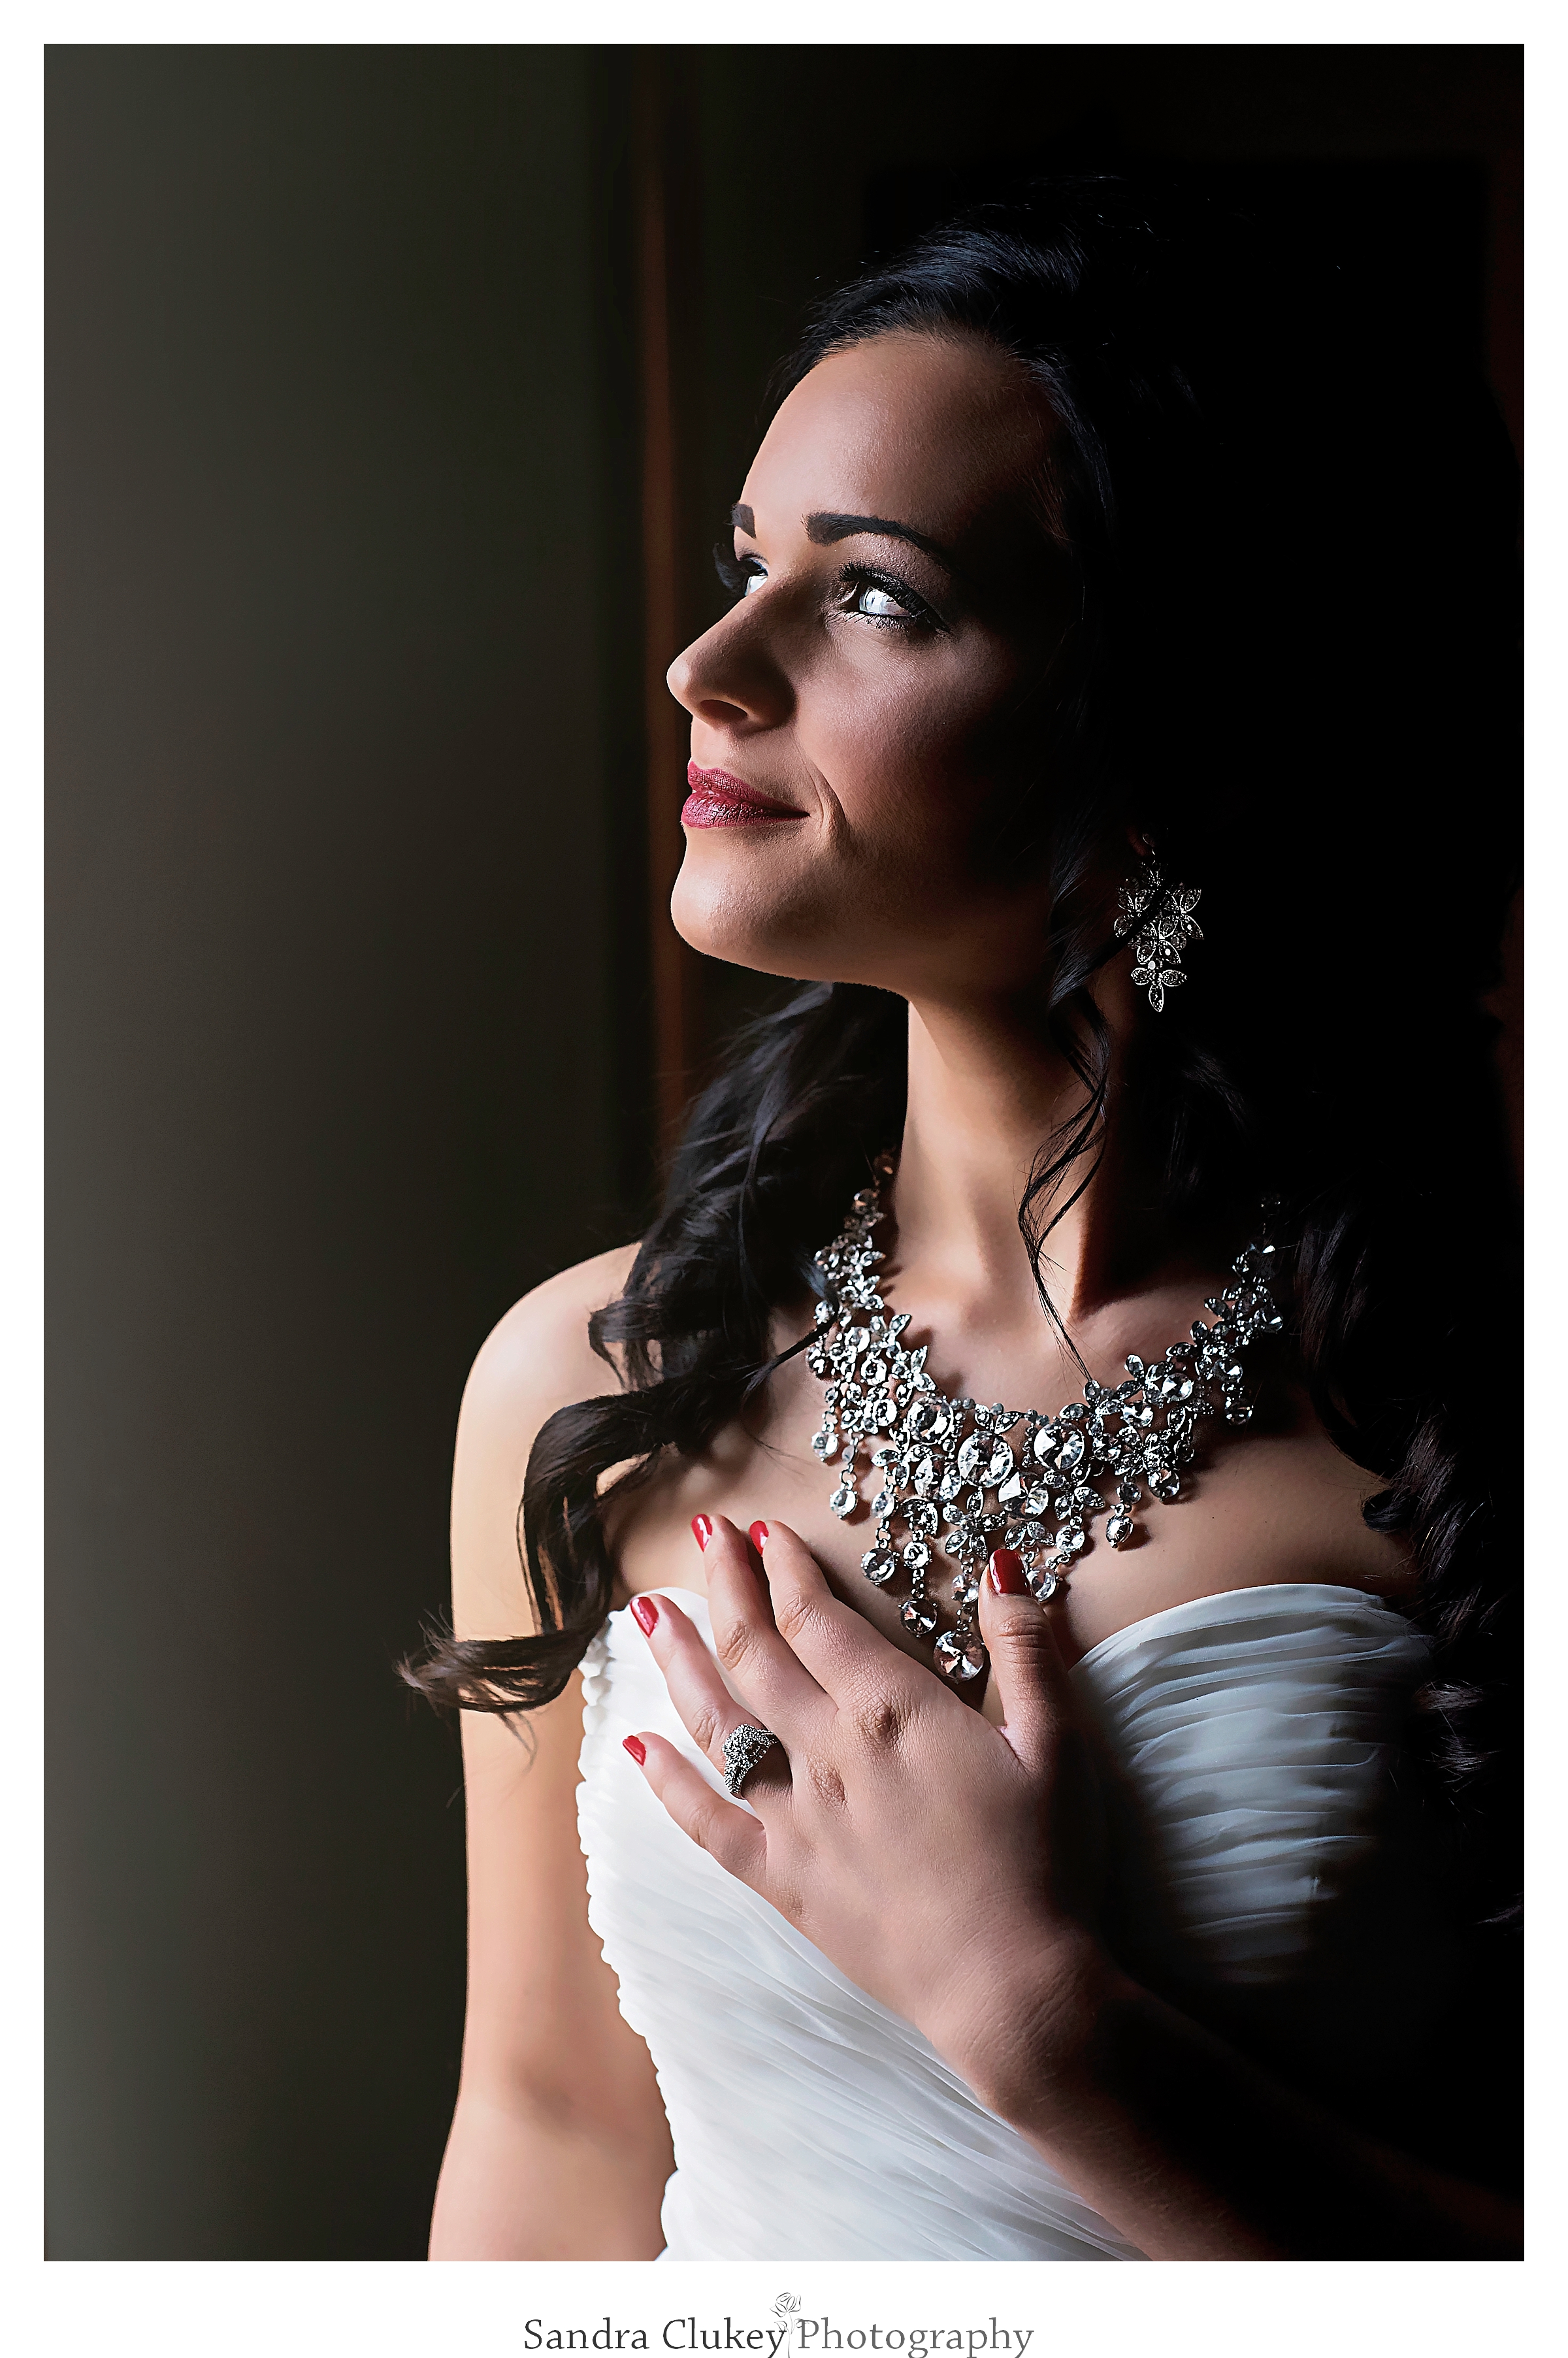 Stunning bride in deep reflection at Lee University Chapel, Cleveland TN